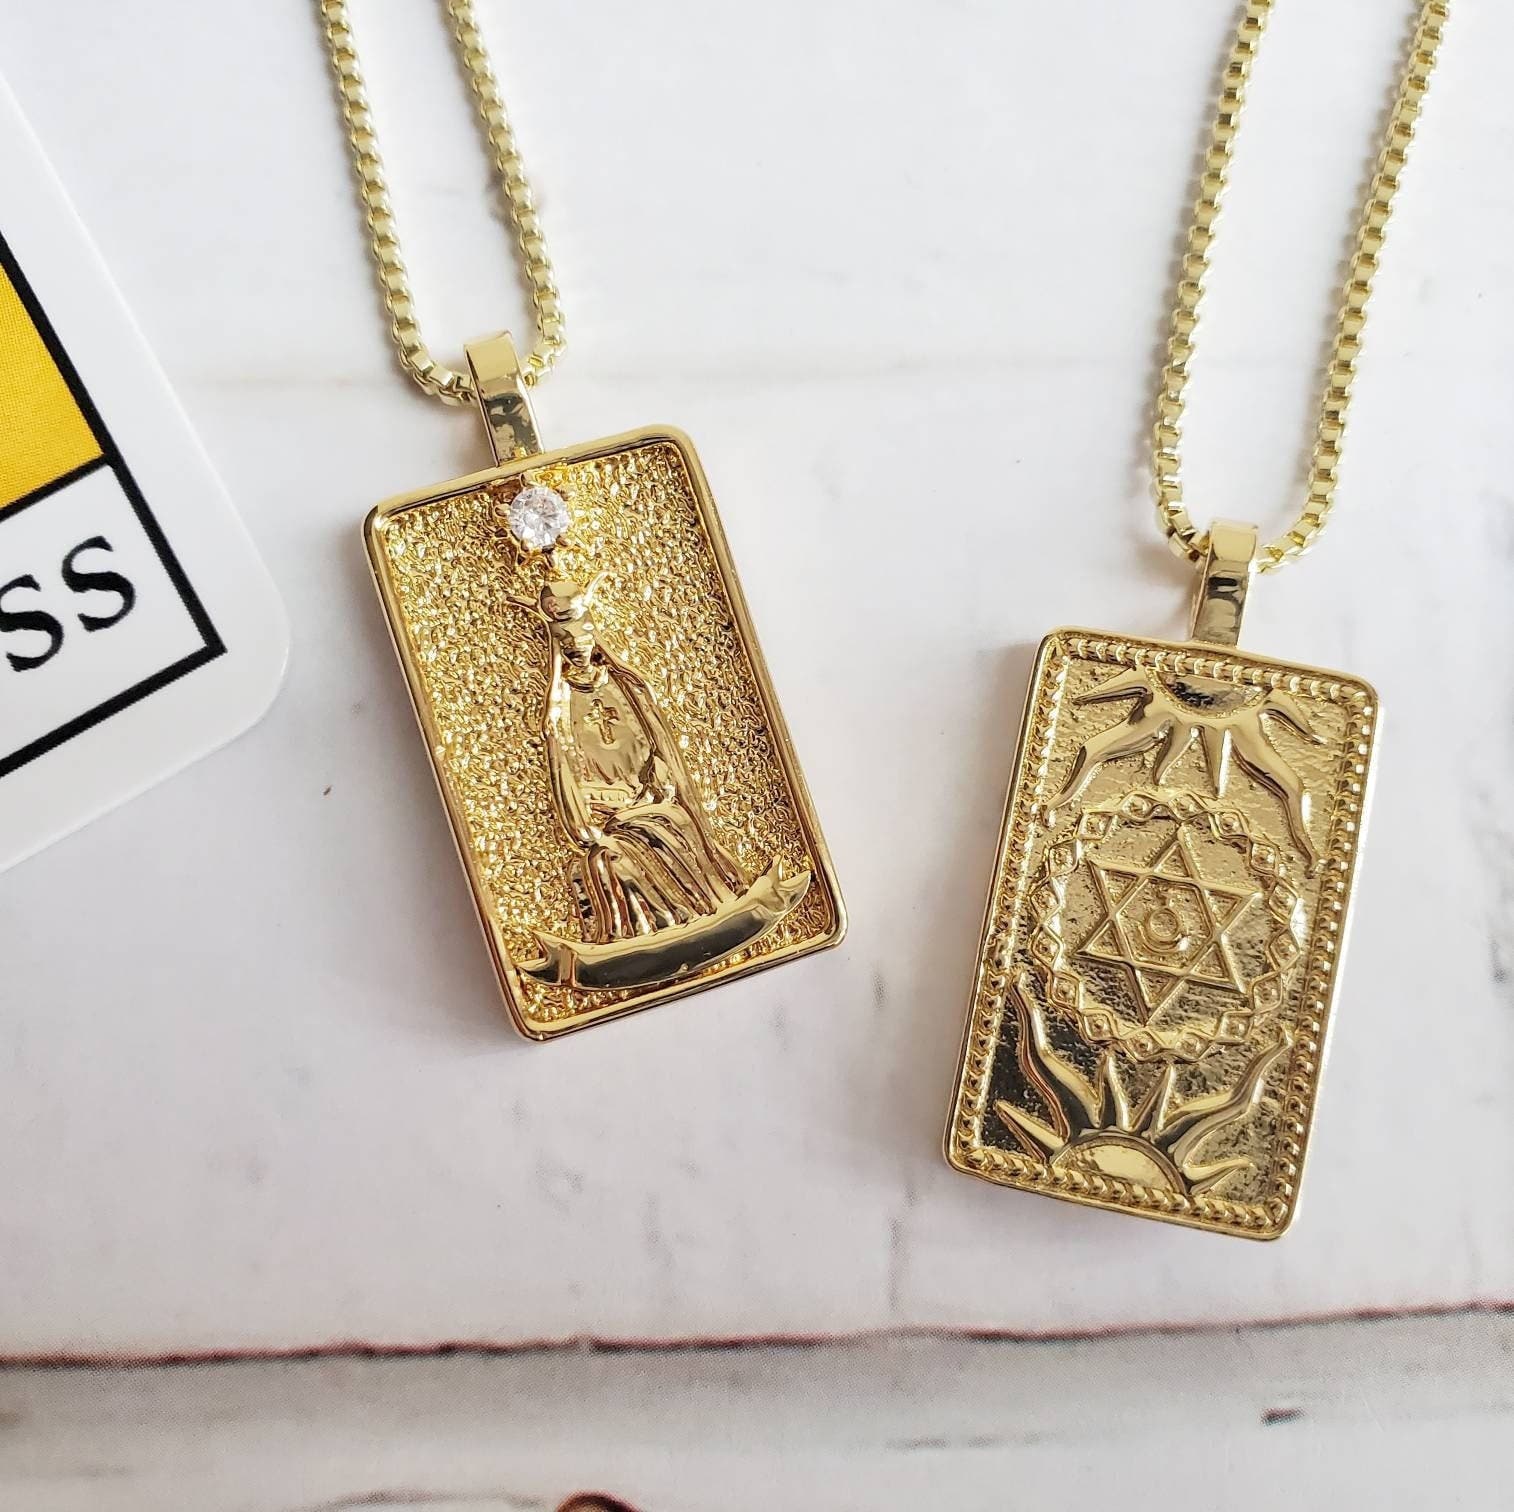 THE HIGH PRIESTESS Tarot Deck Card Necklace | 14K Gold Box Chain Pendant Necklace | Delicate, Minimalist Intention Necklace | Tarot Jewelry